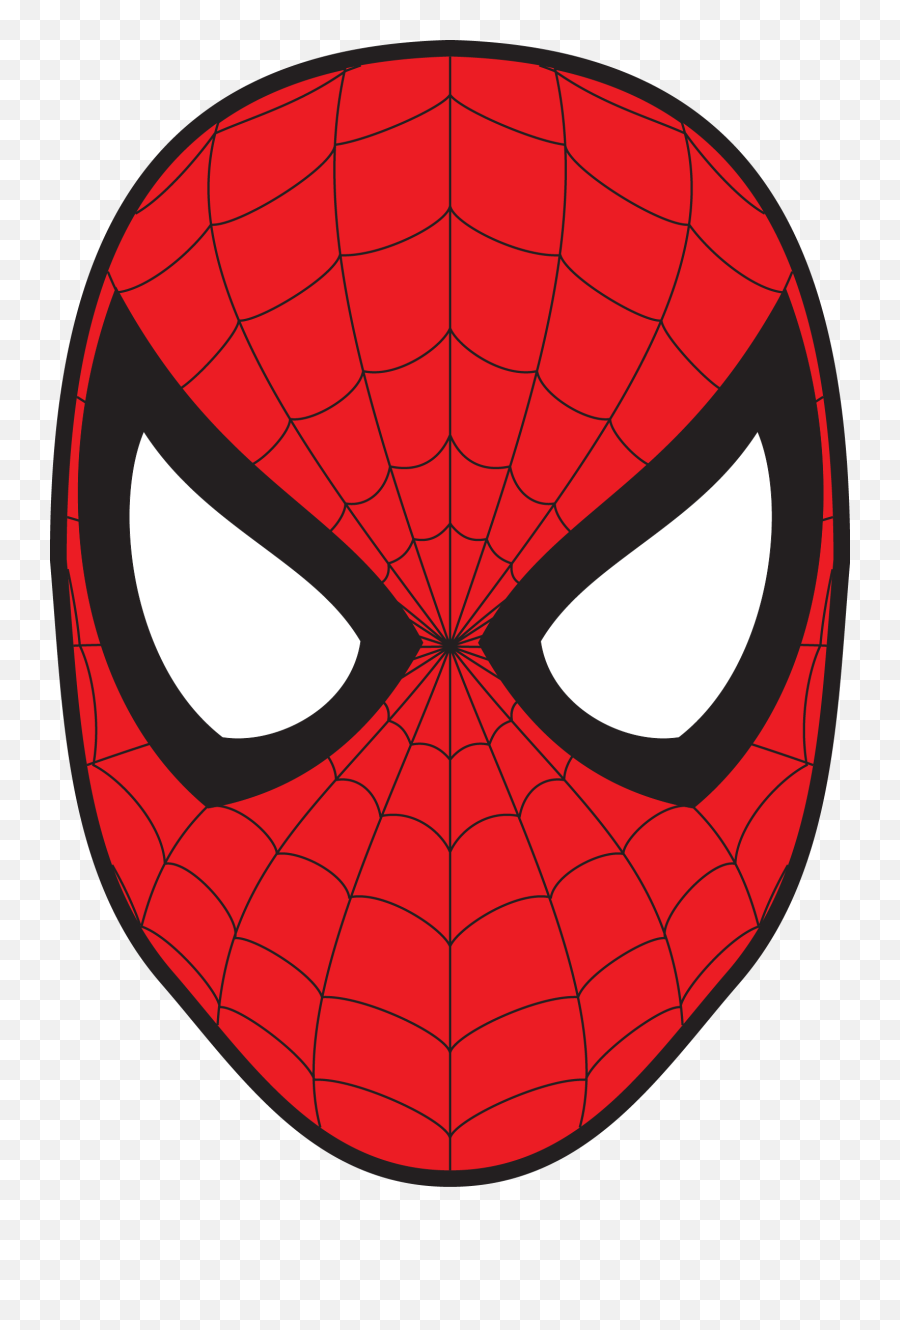 Spiderman Face - Spiderman Face Emoji,Spiderman Face Png